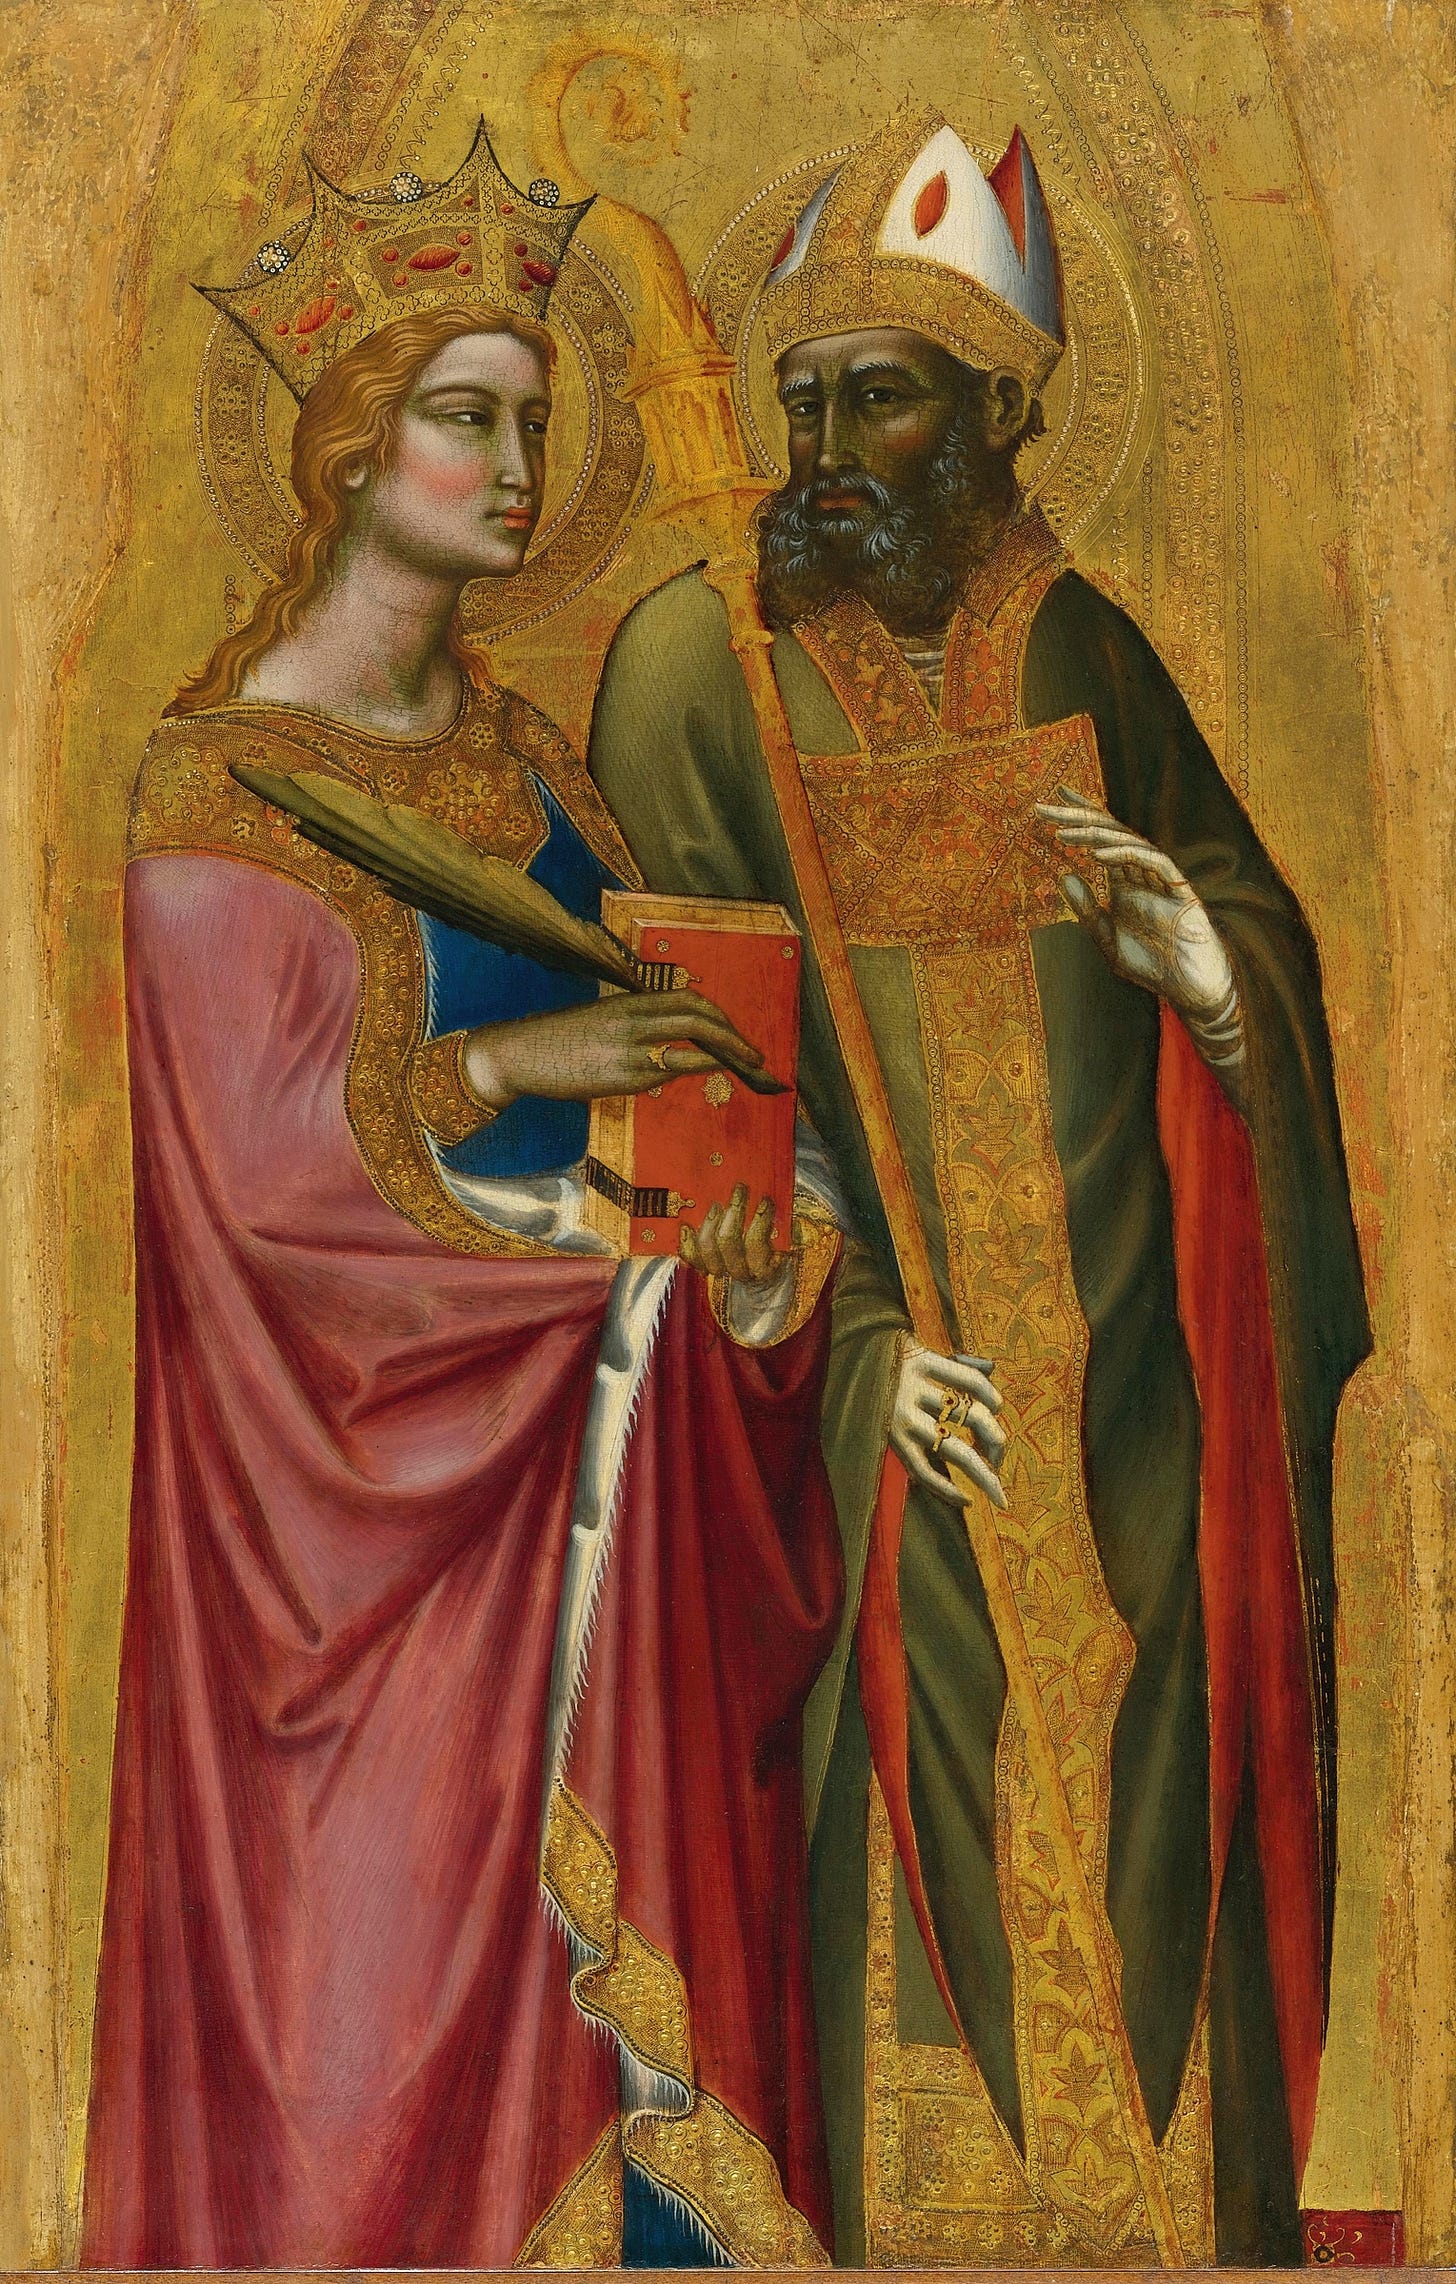 Saint Catherine And A Bishop Saint by Angelo Puccinelli (Italian, active 1380-1407)